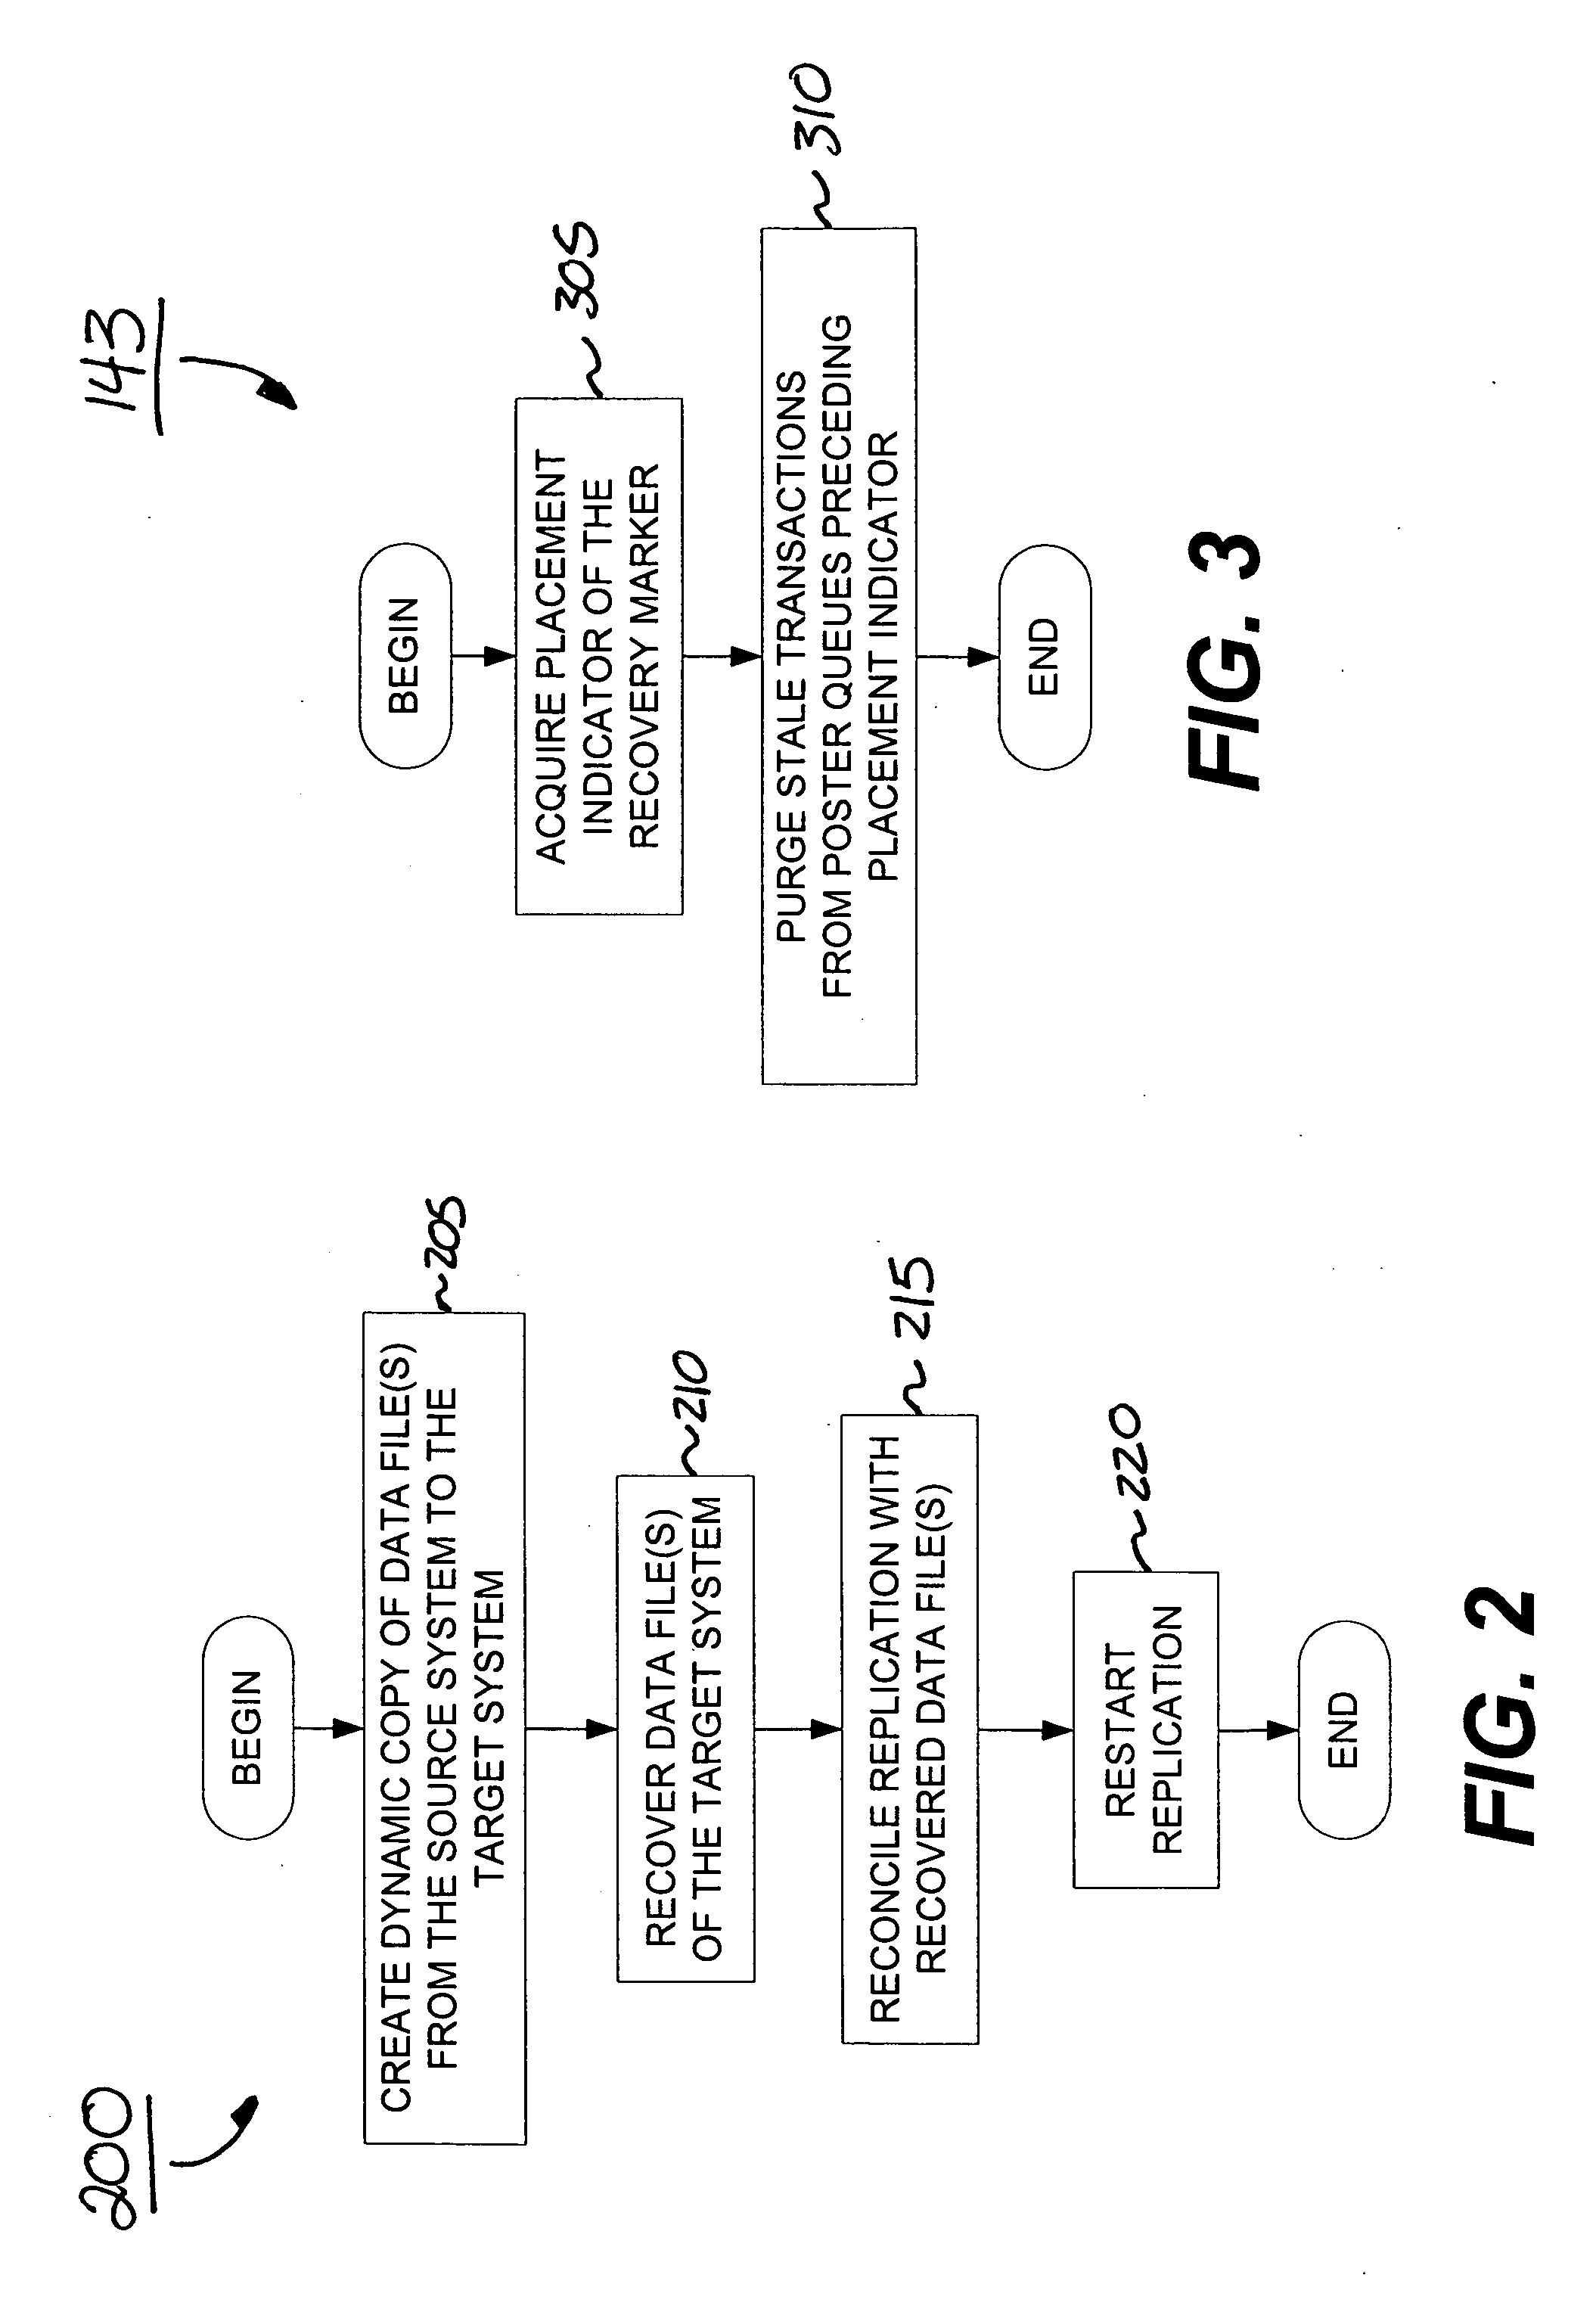 System and method for reconciling transactions between a replication system and a recovered database